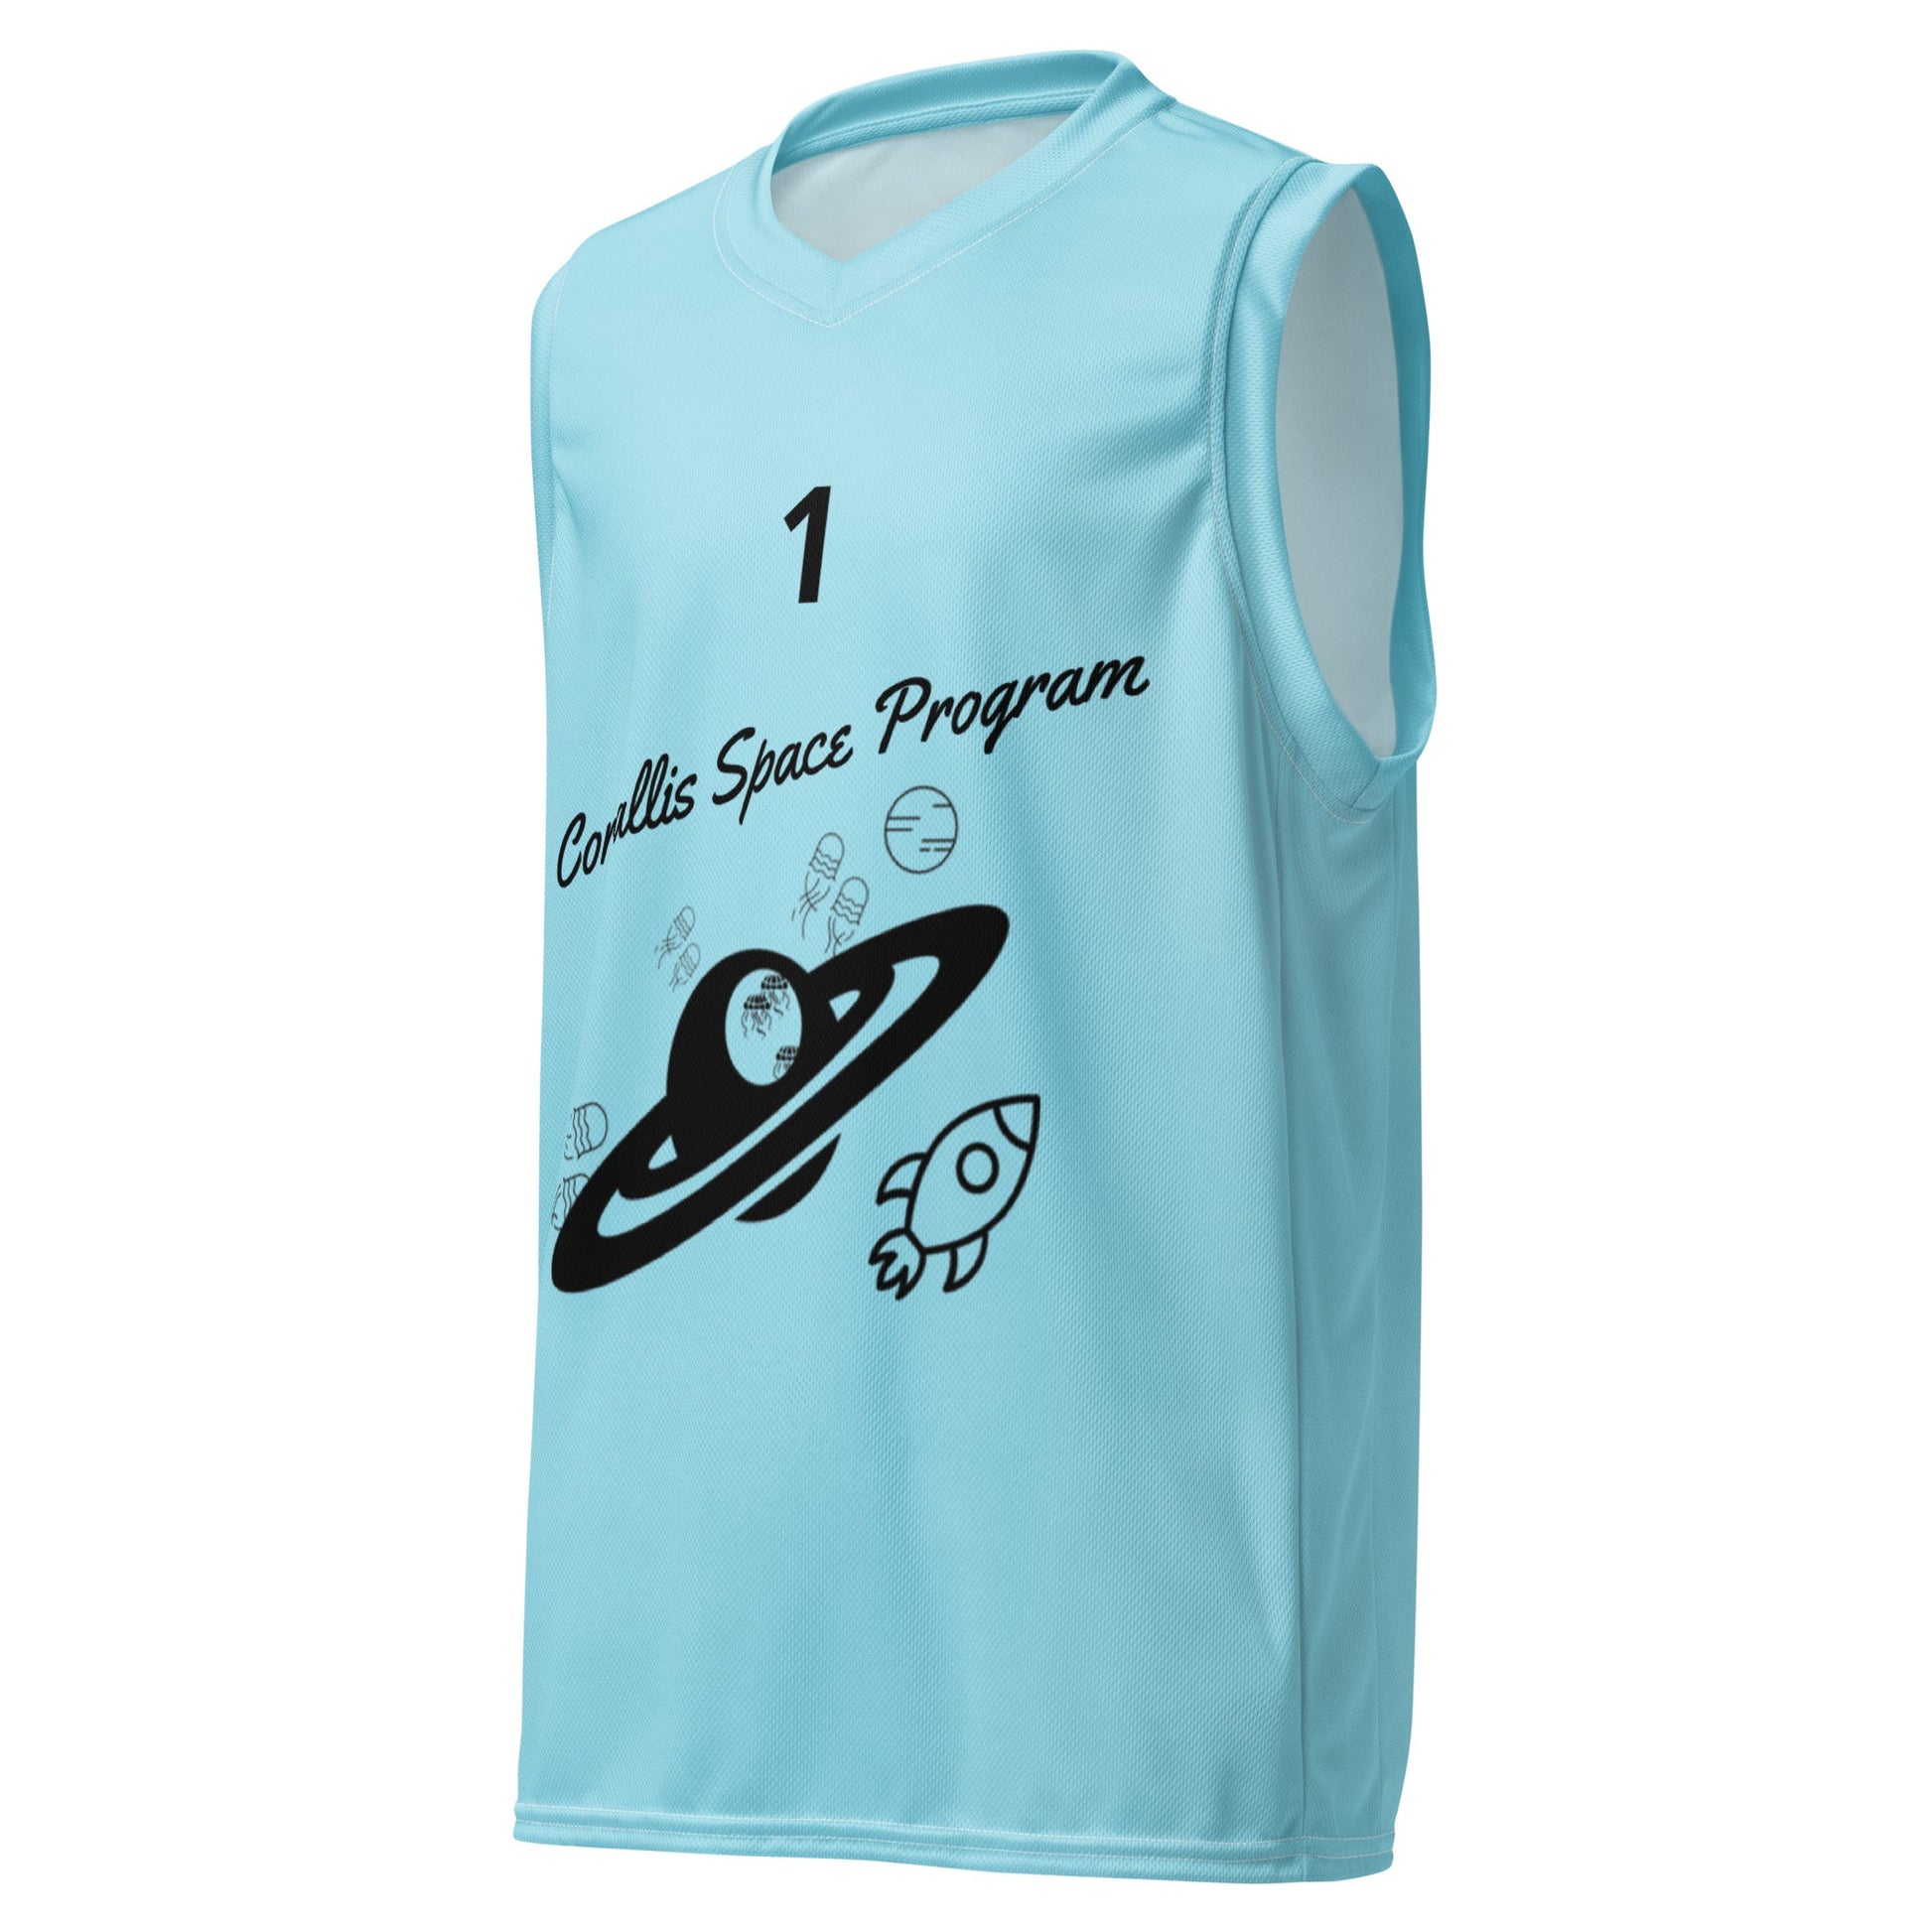 Corvallis Space Program Recycled Basketball Jersey - Science Label